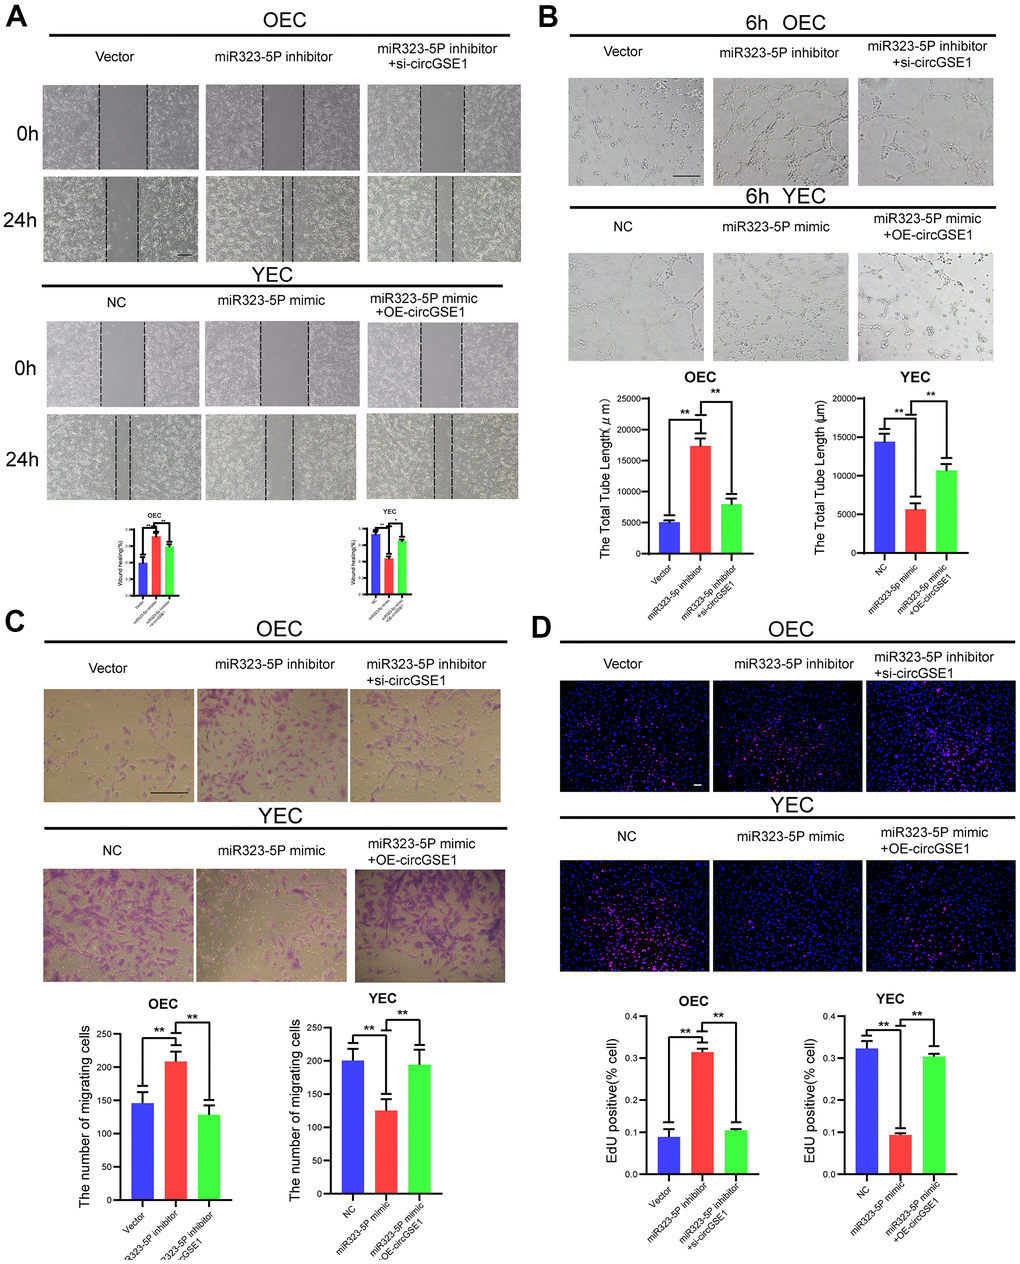 CircGSE1 regulates the angiogenic ability of MAECs via the miR-323-5p. (A) Wound healing assay of OECs treated with vector, the miR-323-5p inhibitor or the miR-323-5p inhibitor + circGSE1 siRNA and YECs treated with the NC, miR-323-5p mimic or miR-323-5p mimic+OE-circGSE1. The graph indicates the quantification of the wounded area 24 hours after scratching (n=3, scale bar: 200 μm). (B) Tube formation assay of OECs treated with the vector, miR-323-5p inhibitor or miR-323-5p inhibitor+circGSE1 siRNA and YECs treated with the NC, miR-323-5p mimic or miR-323-5p mimic+OE-circGSE1 (n=3, scale bar, 200 μm). (C) Migration assay of OECs treated with the vector, miR-323-5p inhibitor or miR-323-5p inhibitor + circGSE1 siRNA and YECs treated with the NC, miR-323-5p mimic or miR-323-5p mimic+OE-circGSE1 (n=5, scale bar, 200 μm). (D) EdU assay of OECs treated with the vector, miR-323-5p inhibitor or miR-323-5p inhibitor + circGSE1 siRNA and YECs treated with the NC, miR-323-5p mimic or miR-323-5p mimic+OE-circGSE1 (n=5, scale bar, 200 μm). (The data are expressed as the mean ± SD, *P 